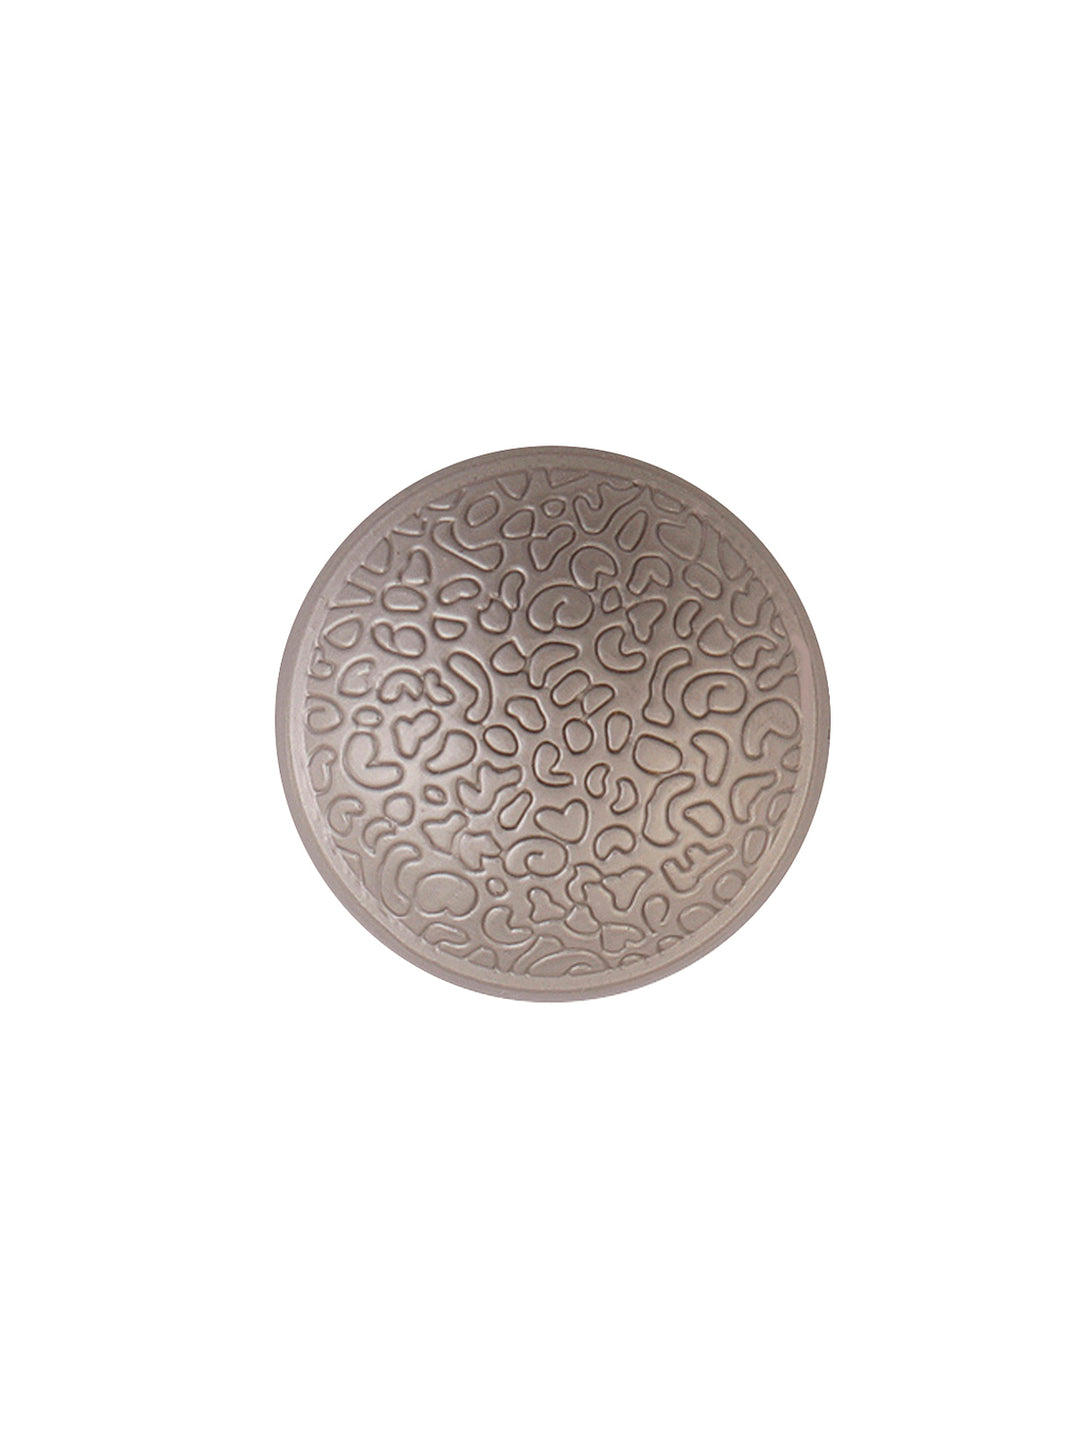 Engraved Design Round Shape Dome Shank Metal Button in Matte Silver Color